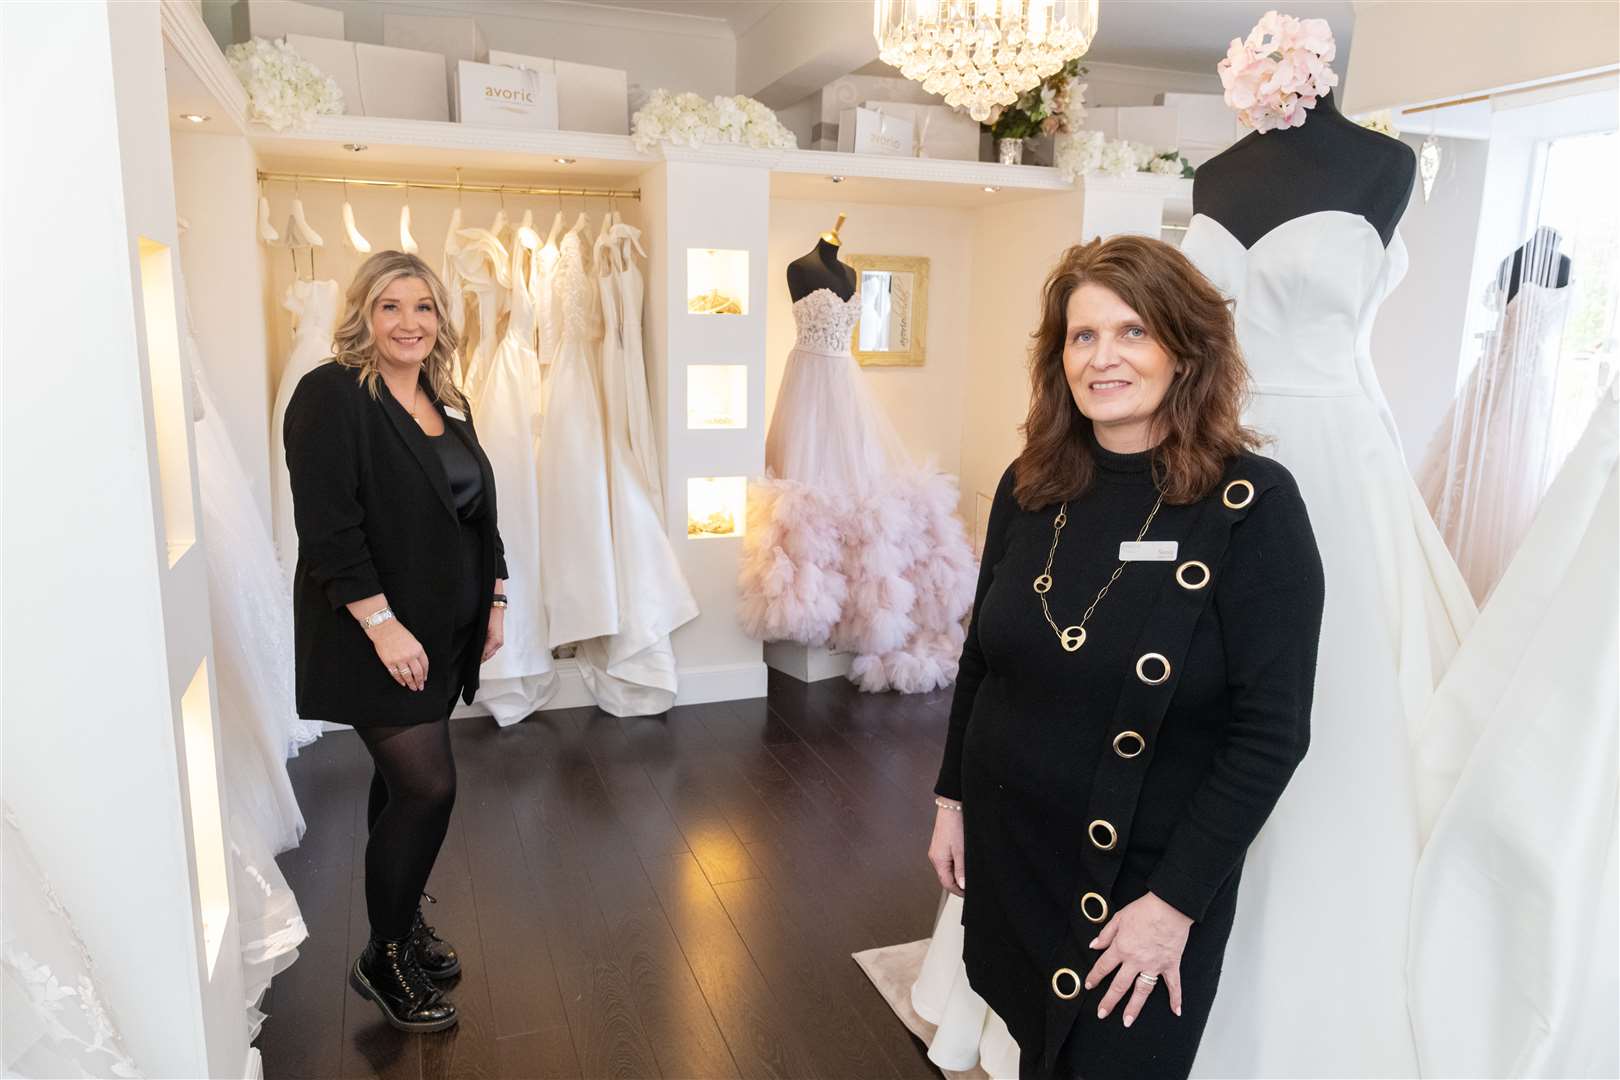 Avorio Bridal owners Leigh-Anne Murray (left) and Sonia Pozzi are delighted the firm is in the finals of both the Scottish Wedding Awards and the Top Tier Wedding Awards. Picture: Beth Taylor.